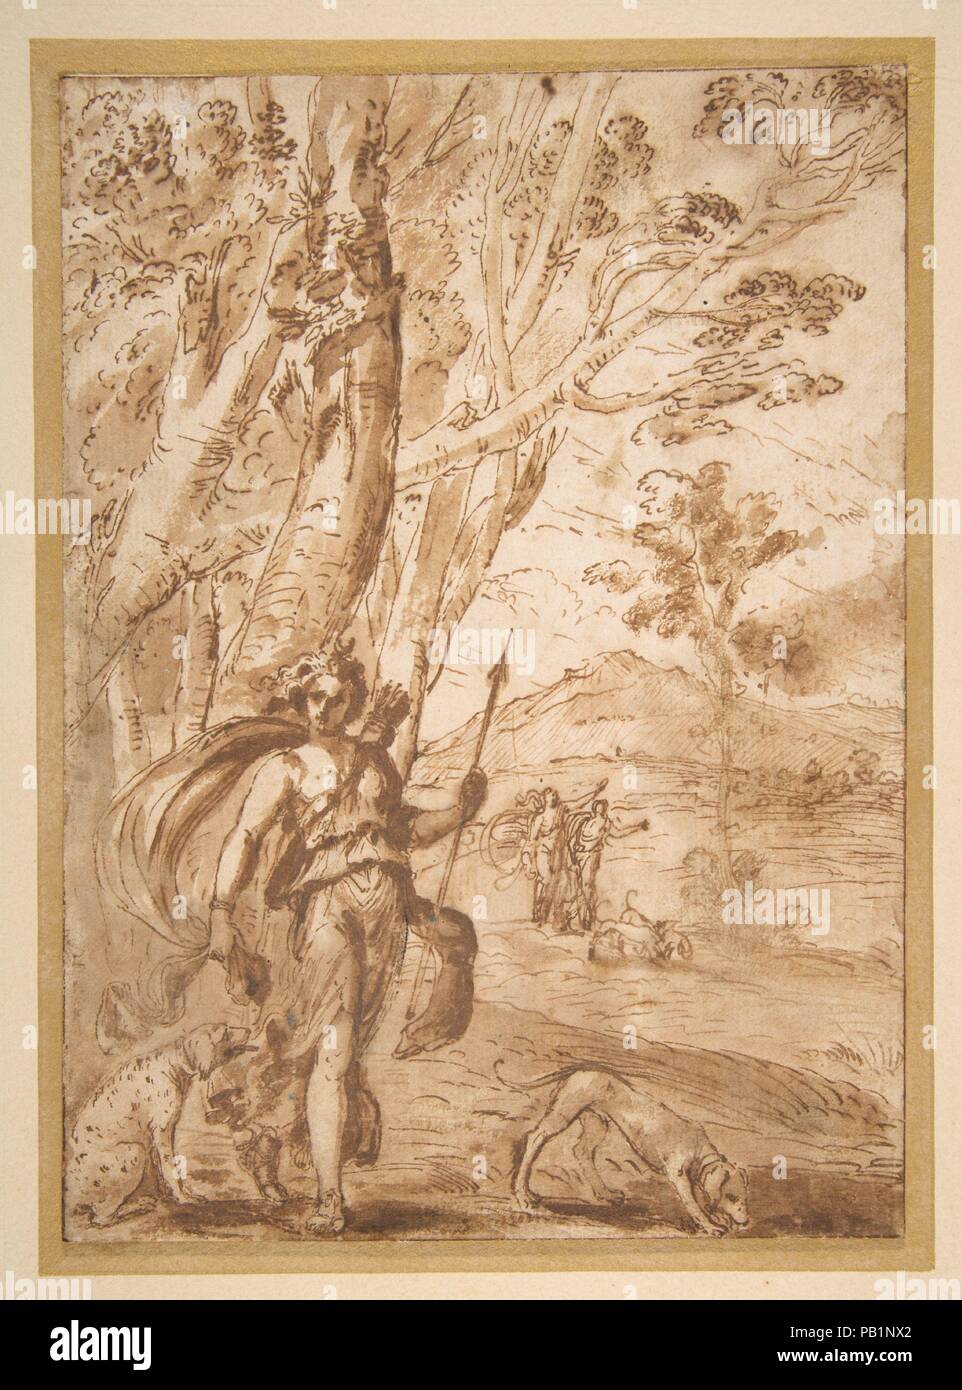 The Goddess Diana with Her Hounds Standing in a Landscape. Artist: Agostino Tassi (Italian, Ponzano Romano ca. 1580-1644 Rome). Dimensions: sheet: 9 x 6 9/16 in. (22.8 x 16.6 cm). Date: n.d.. Museum: Metropolitan Museum of Art, New York, USA. Stock Photo